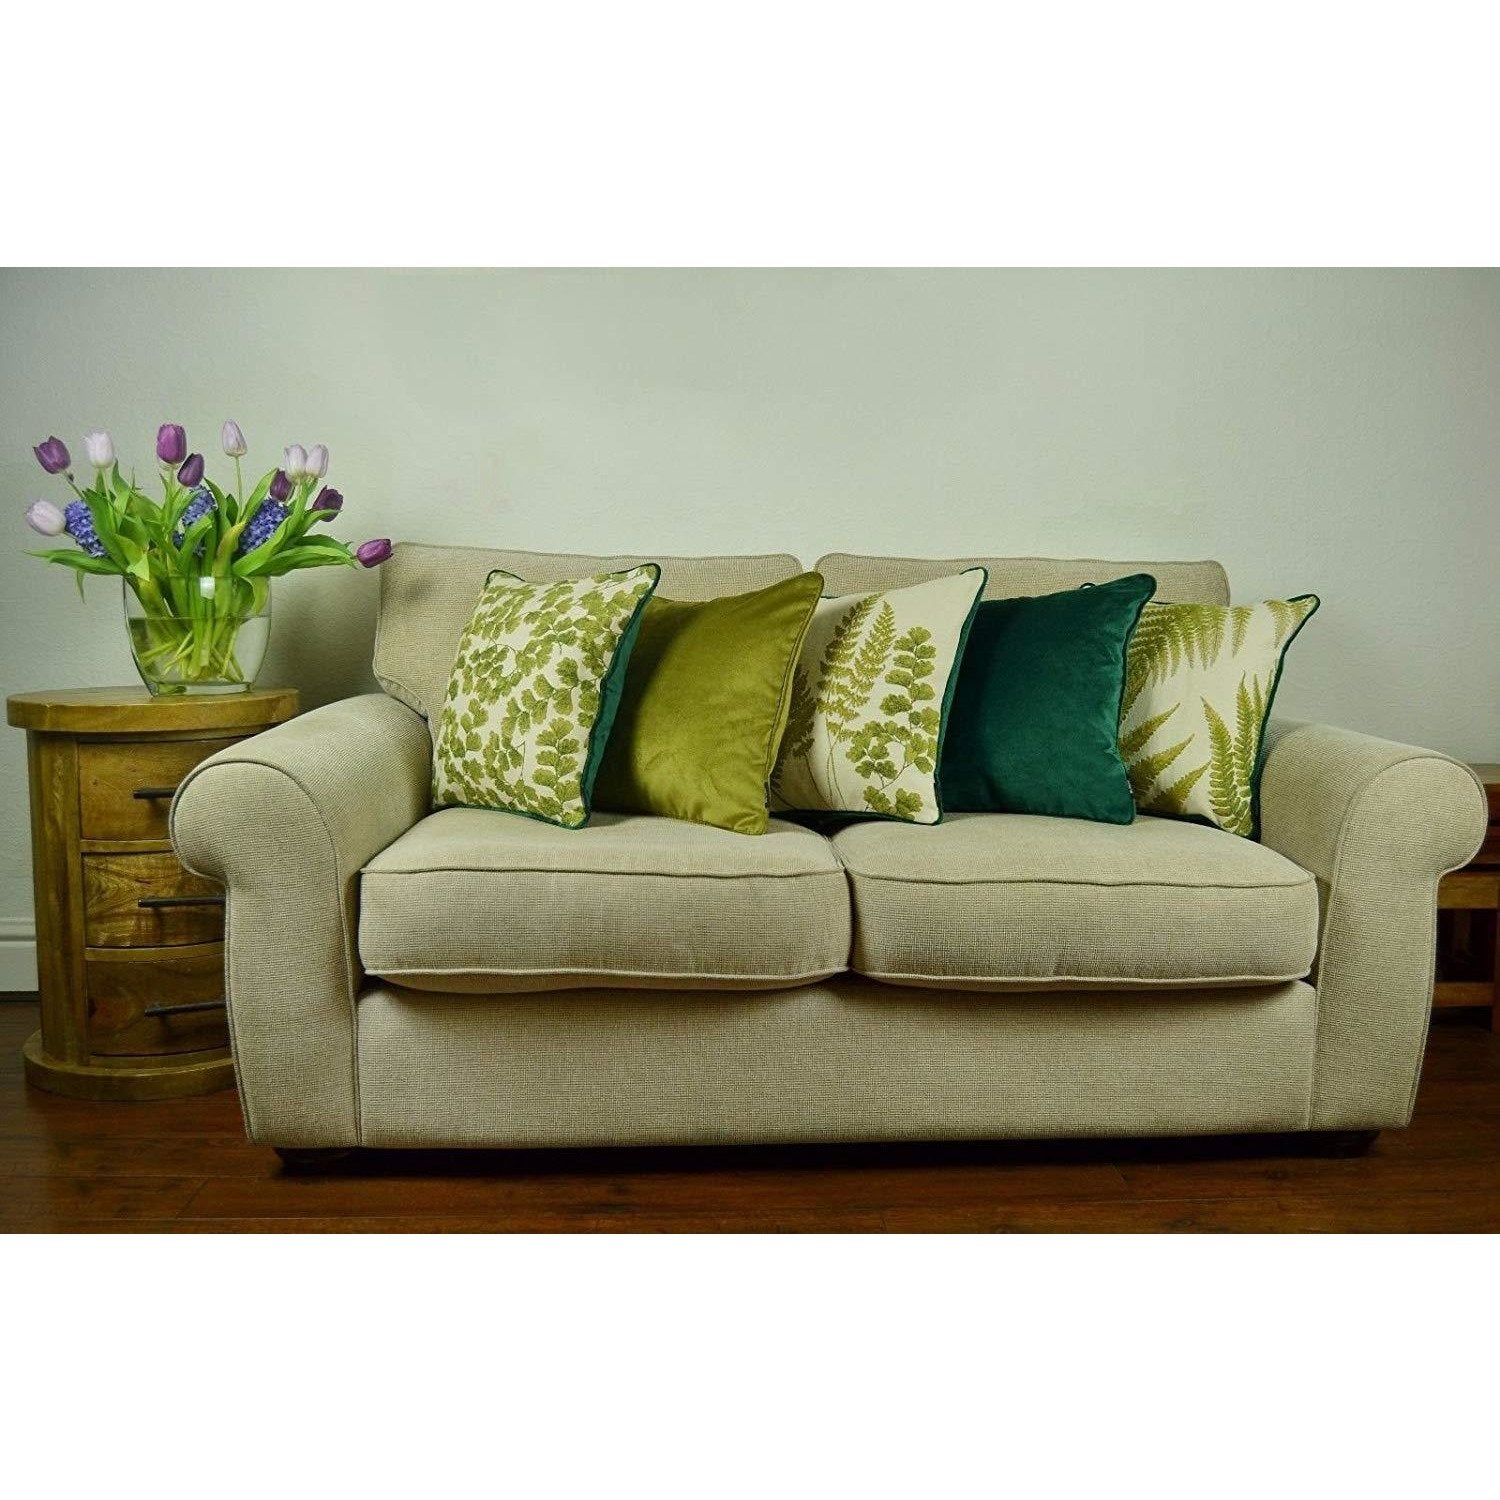 McAlister Textiles Tapestry Maidenhair Fern Green Cushion Cushions and Covers 